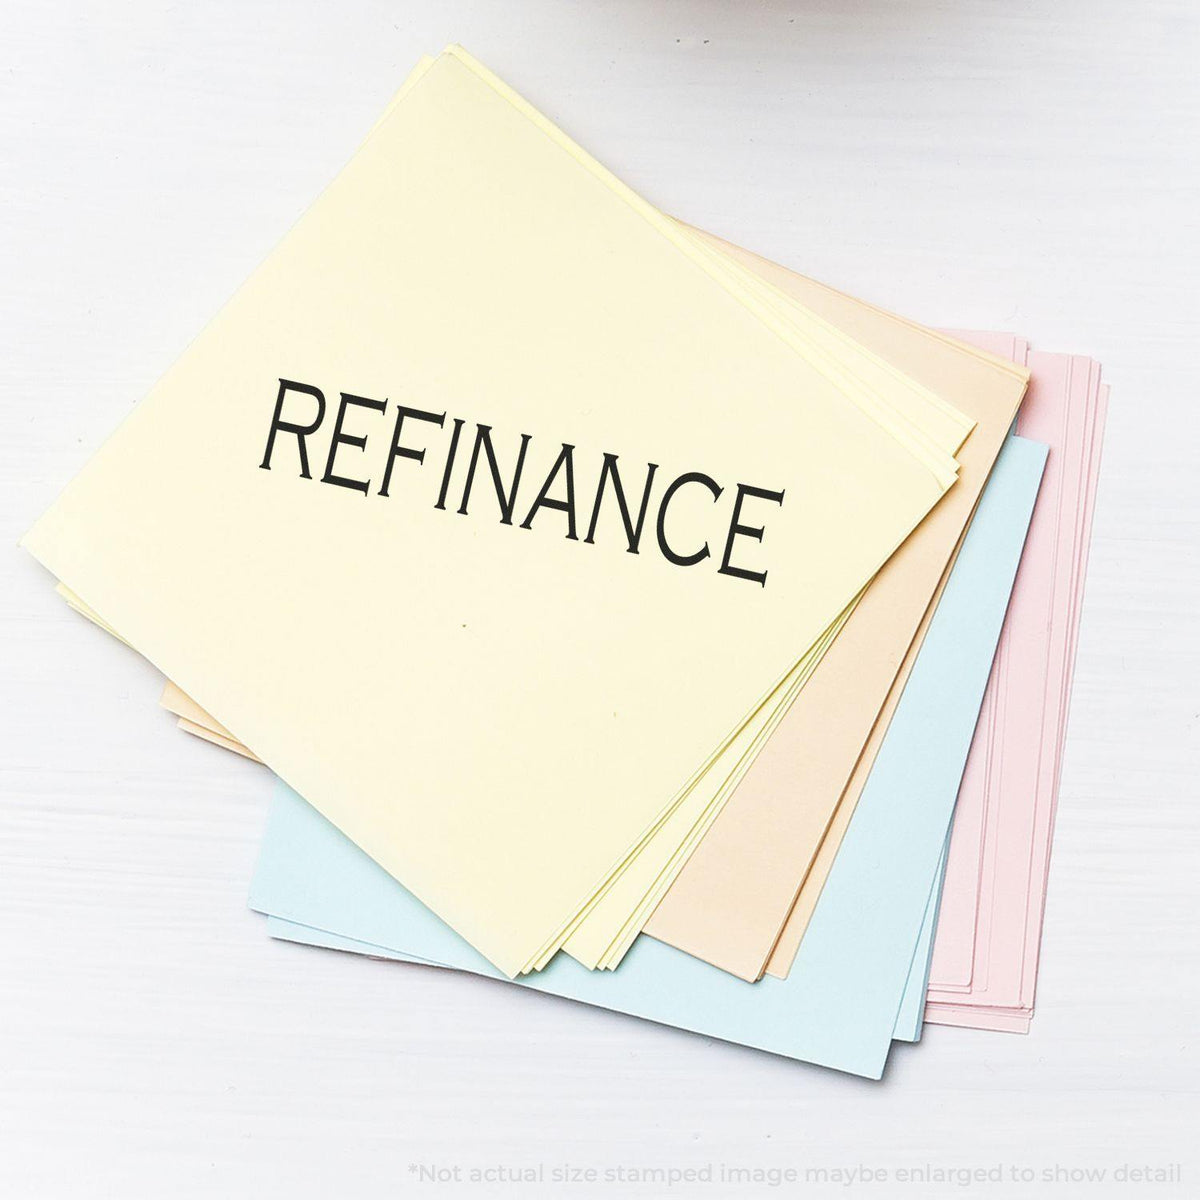 In Use Large Refinance Rubber Stamp Image